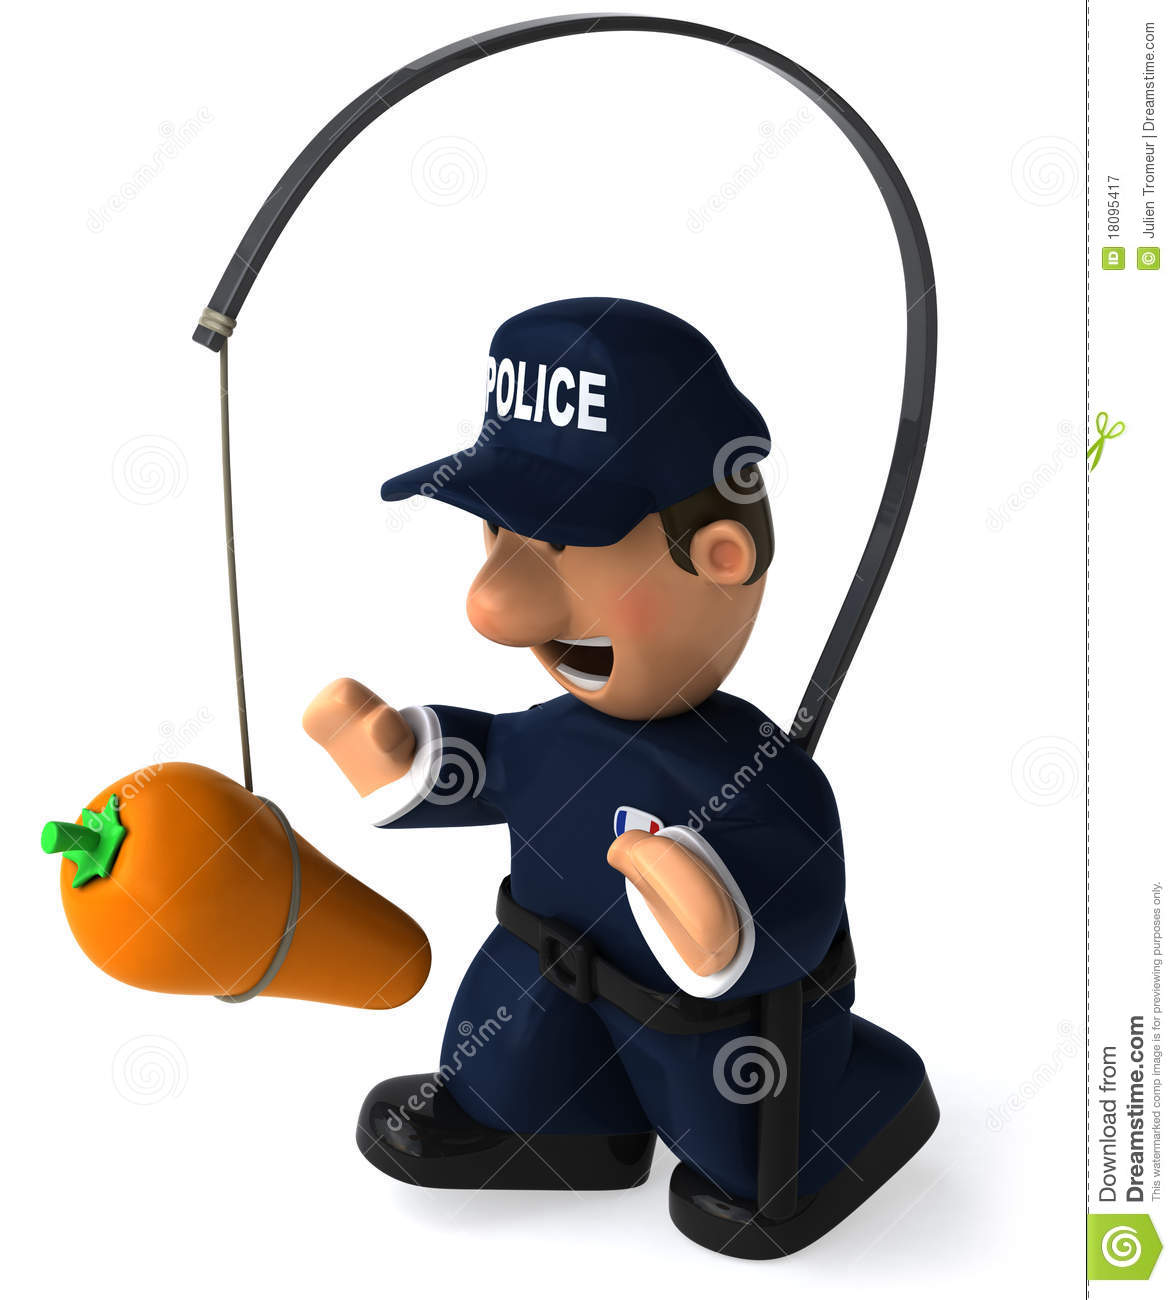 Police Officer Royalty Free Stock Photography   Image  18095417